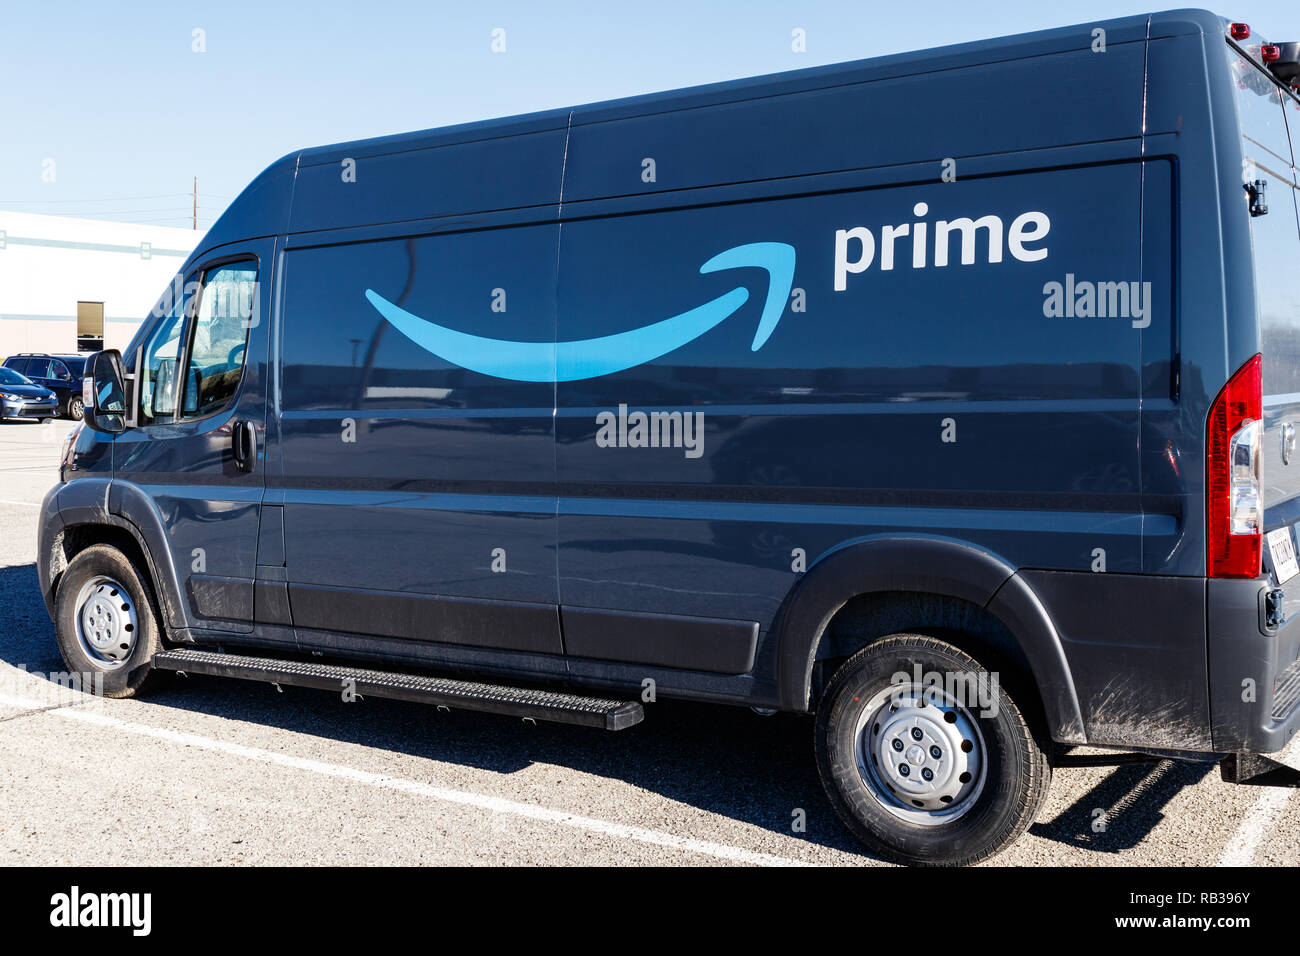 Indianapolis - Circa January 2019: Amazon Prime delivery van. Amazon.com is  getting In the delivery business With Prime branded vans III Stock Photo -  Alamy